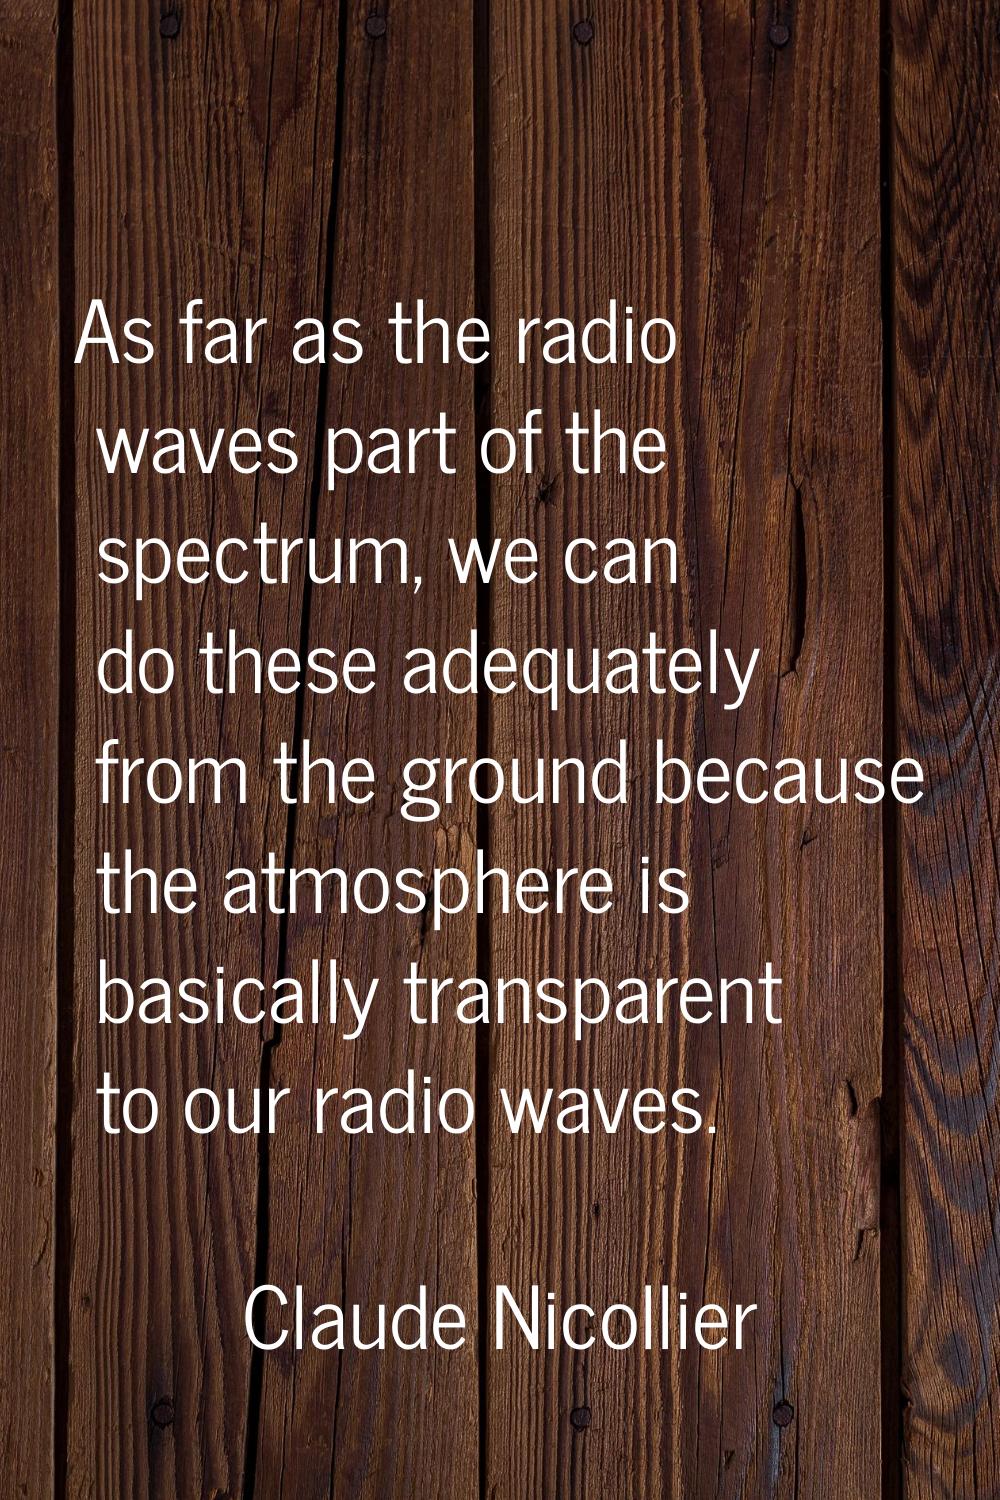 As far as the radio waves part of the spectrum, we can do these adequately from the ground because 